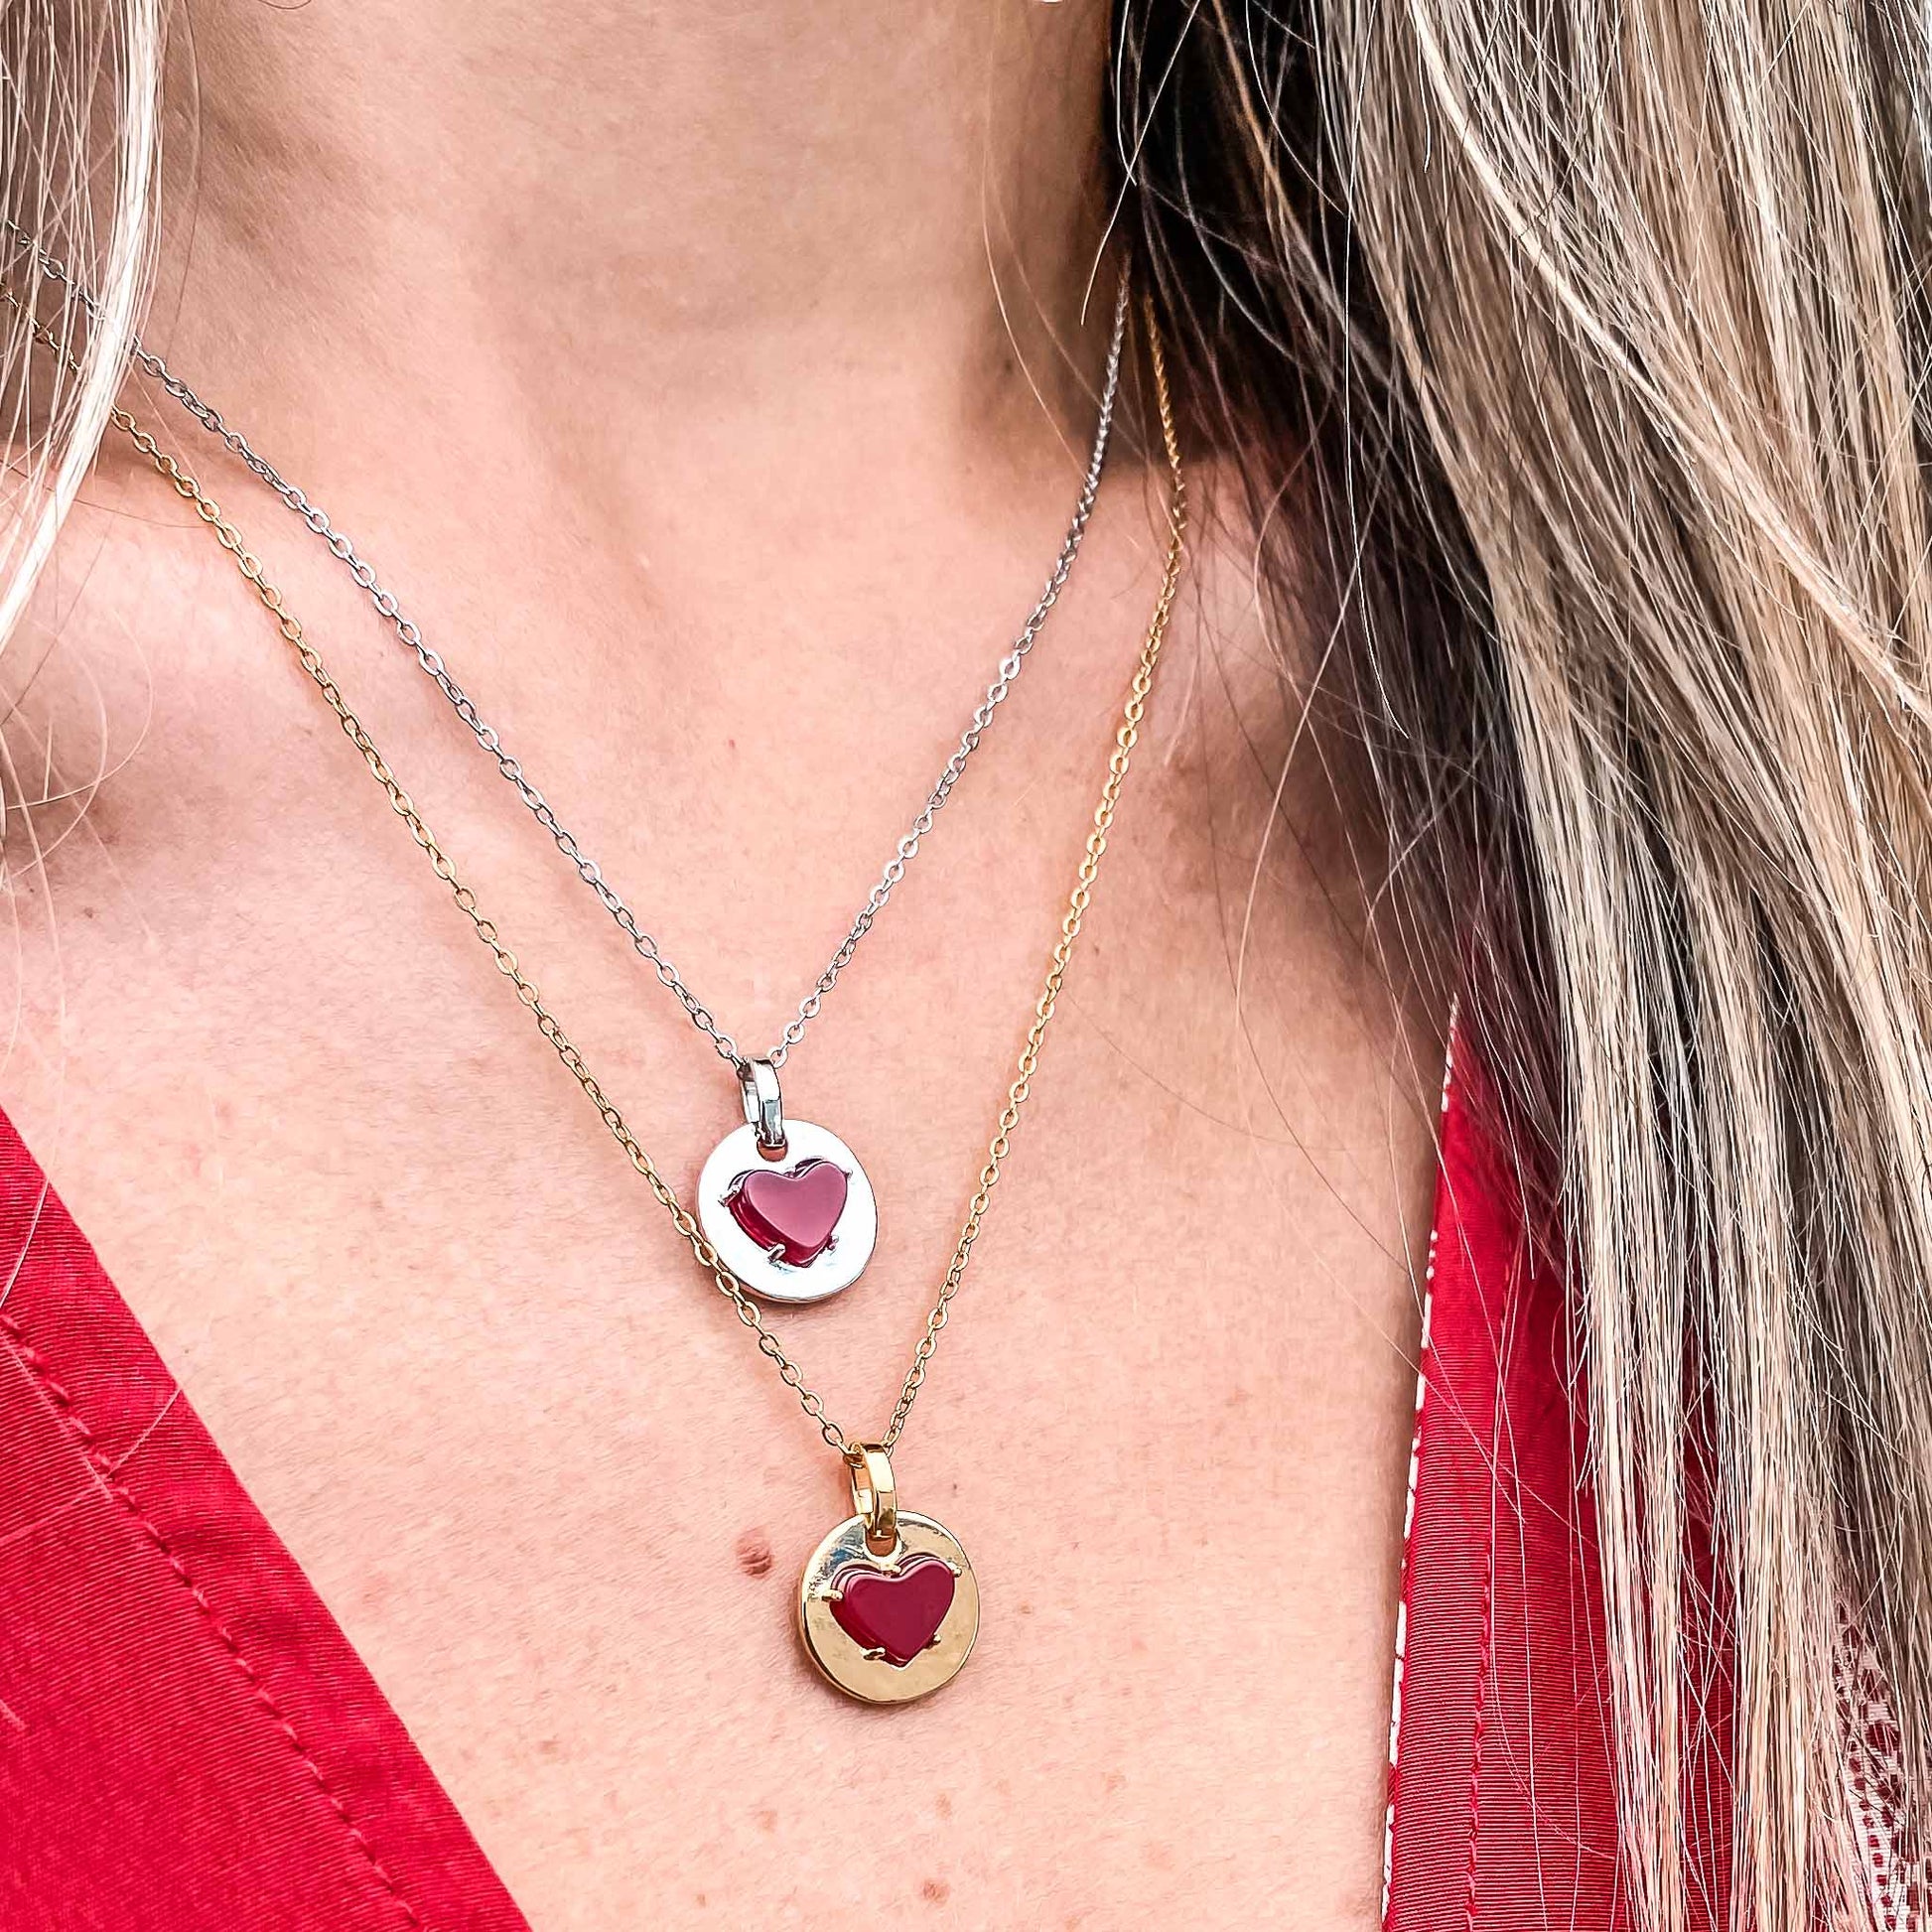 Ruby is July's birthstone and the gem for the 15th & 40th wedding anniversaries. This unique charm necklace is the perfect gift for yourself, Mother's Day, Valentine's Day, graduation, Christmas and birthdays. A personalized gift idea for every mom, grandma, bride, bridesmaid, daughter, wife, mother-in-law & loved one.